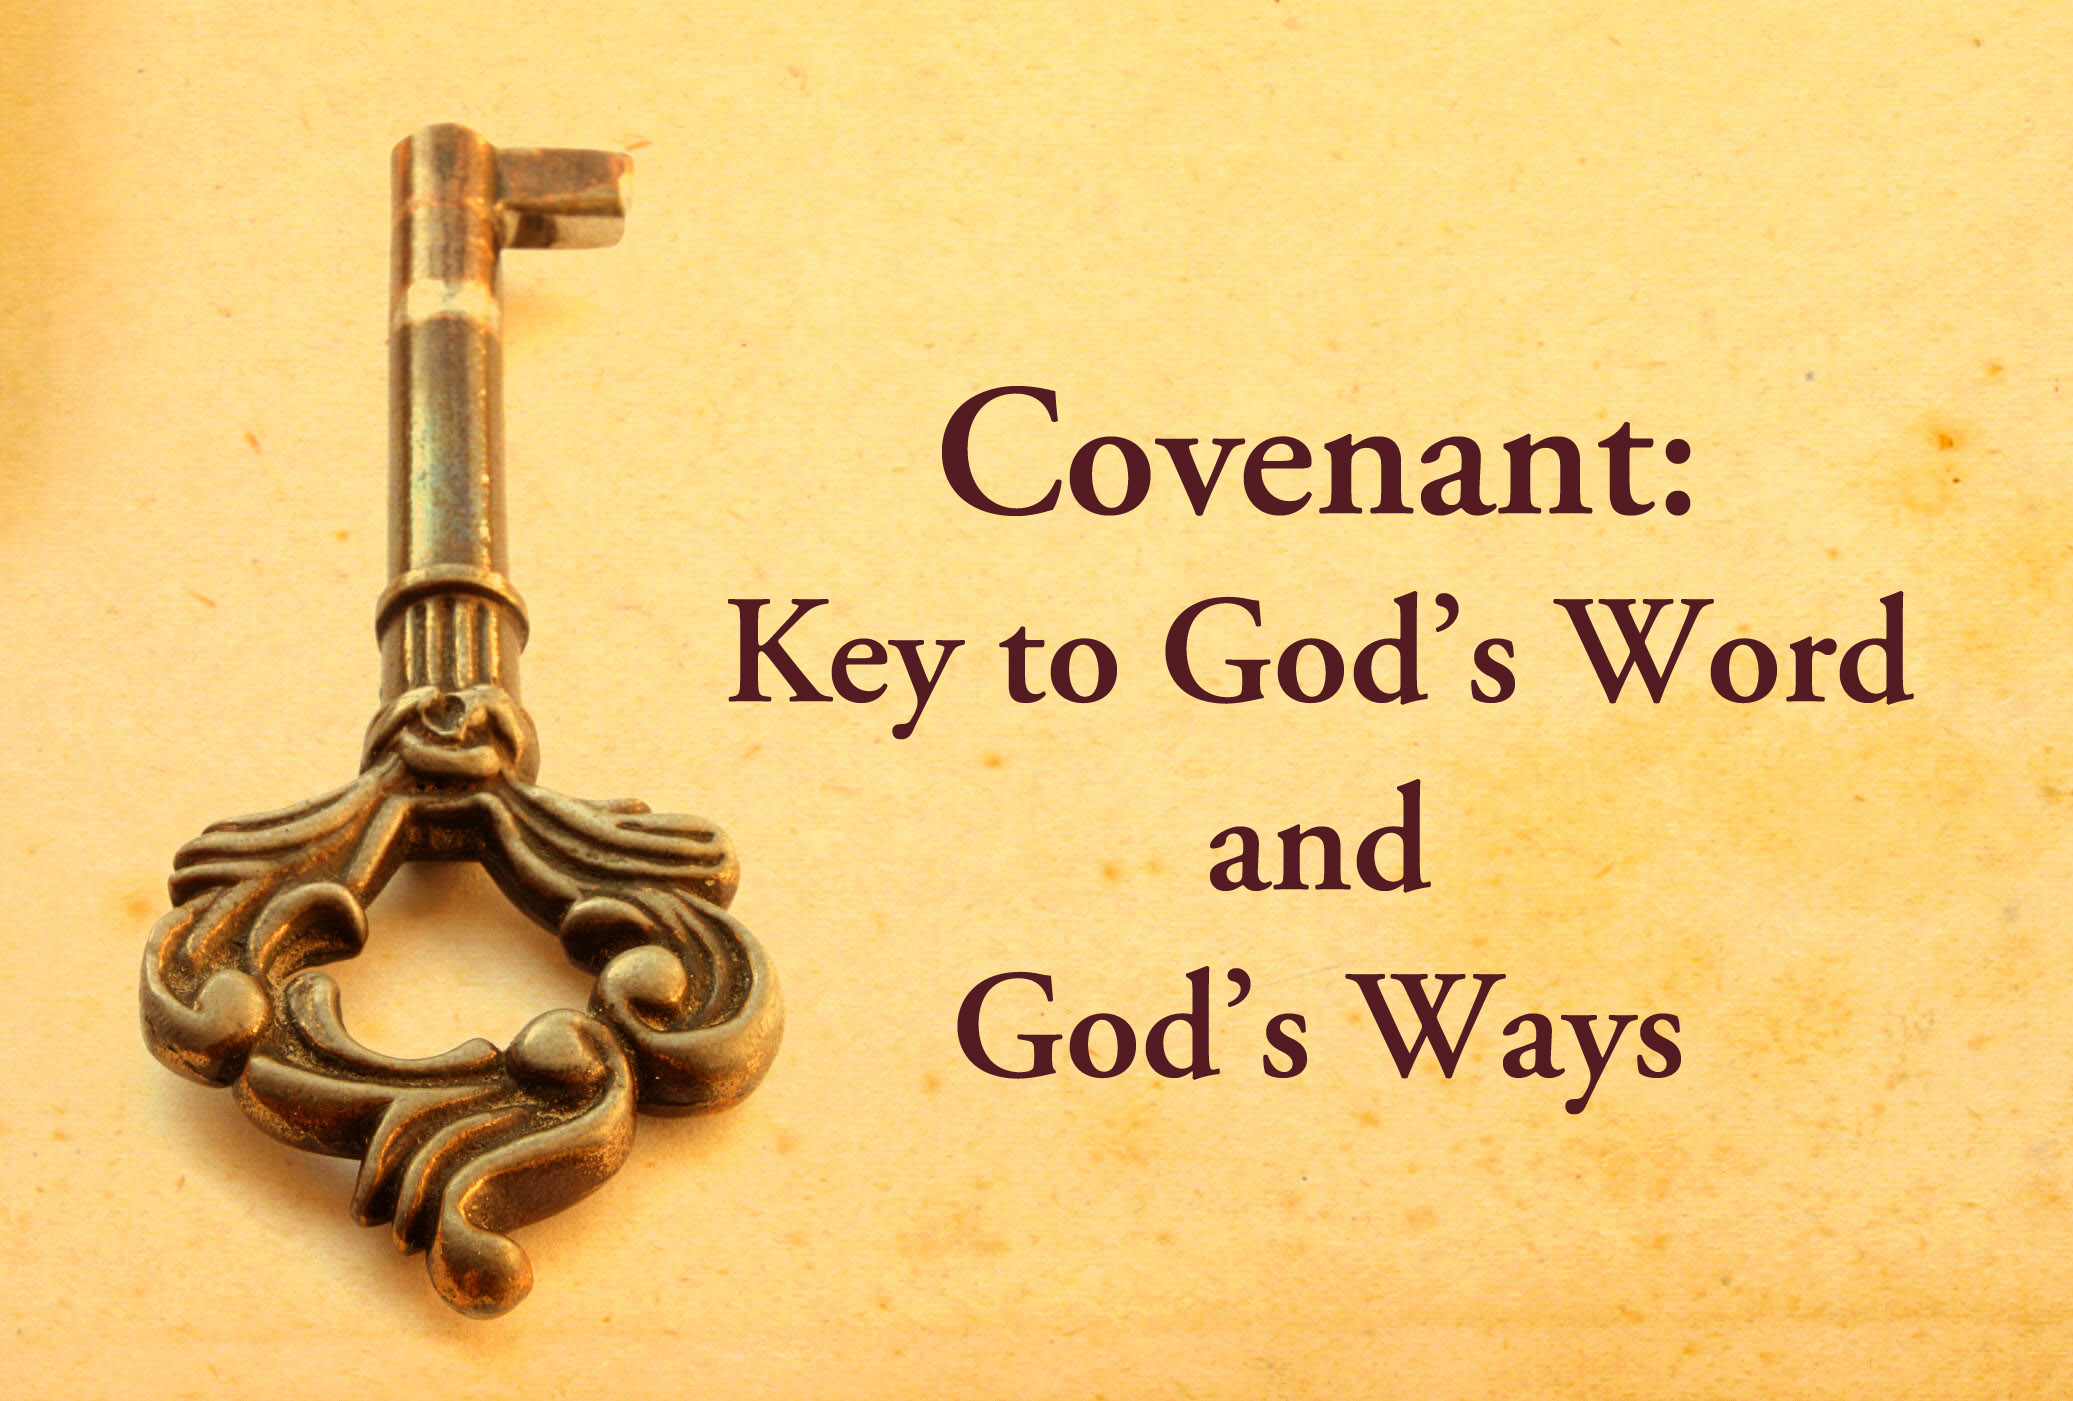 Covenant Key to God's Word and Ways